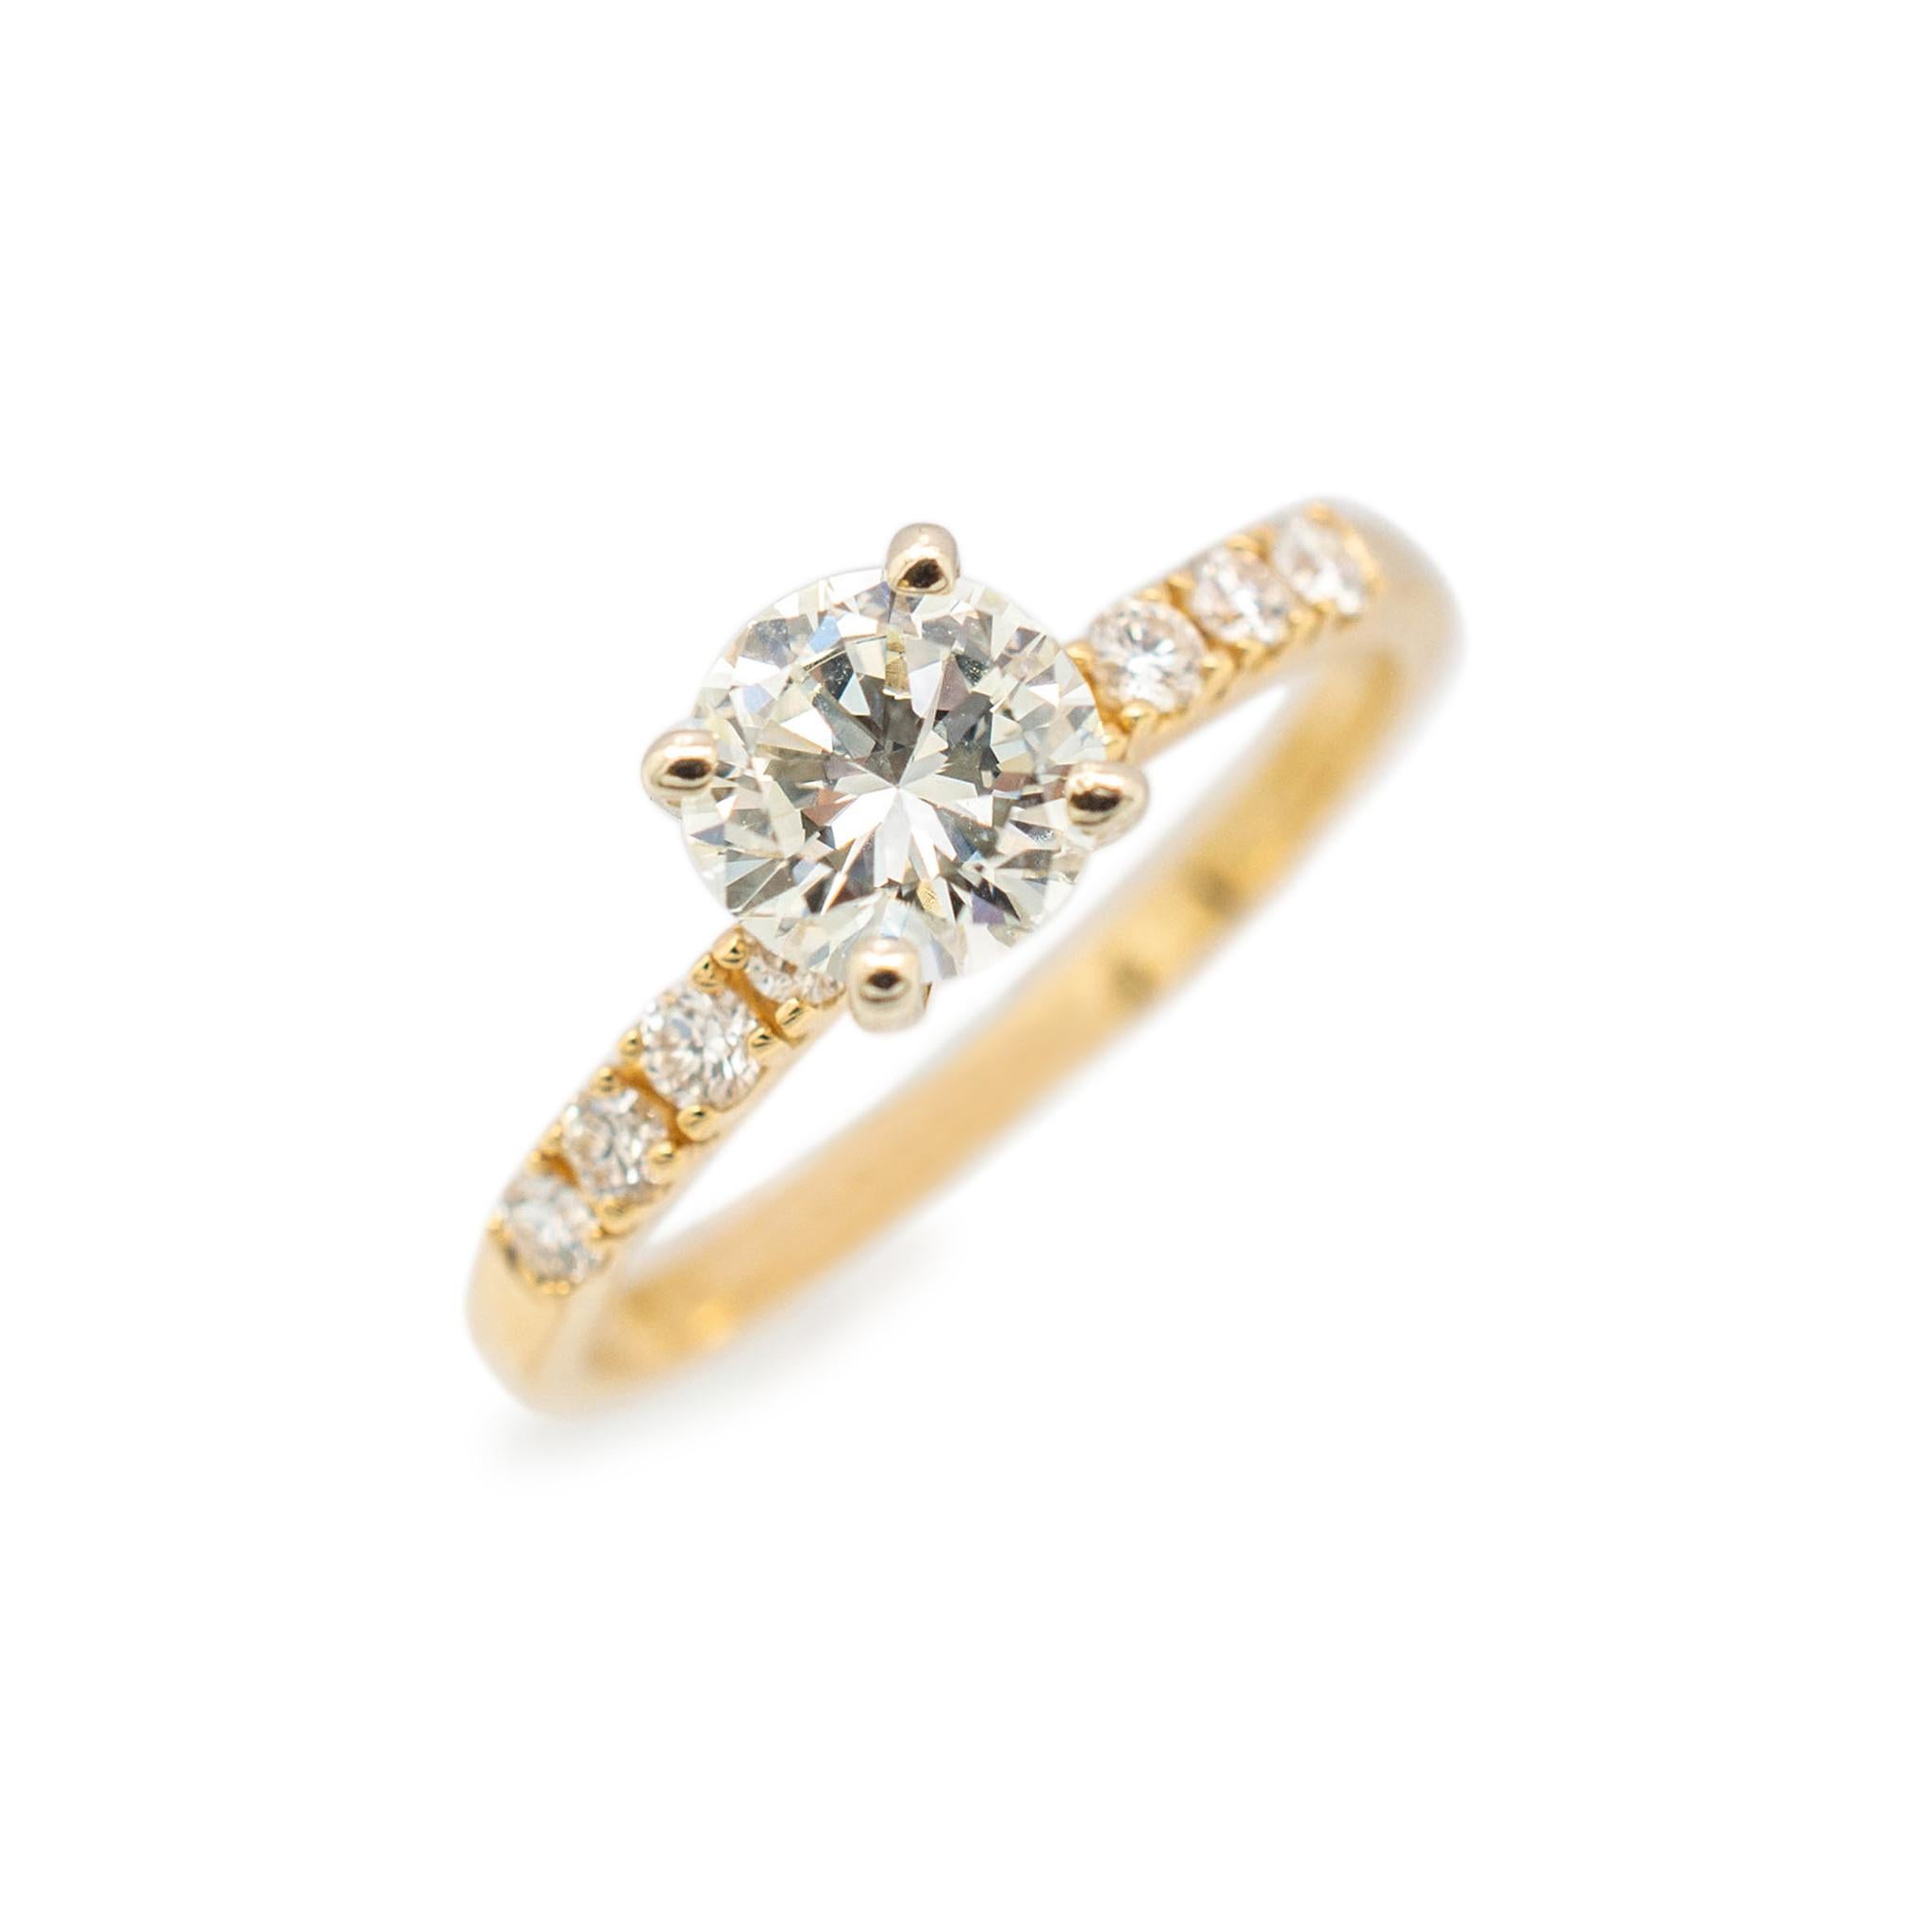 Gender: Ladies

Material: 14K Yellow Gold

Ring Size: 6

Shank Width: 1.90 mm

Weight: 2.20 grams

Ladies 18K yellow gold diamond solitaire engagement ring with a half round shank.
Engraved with 